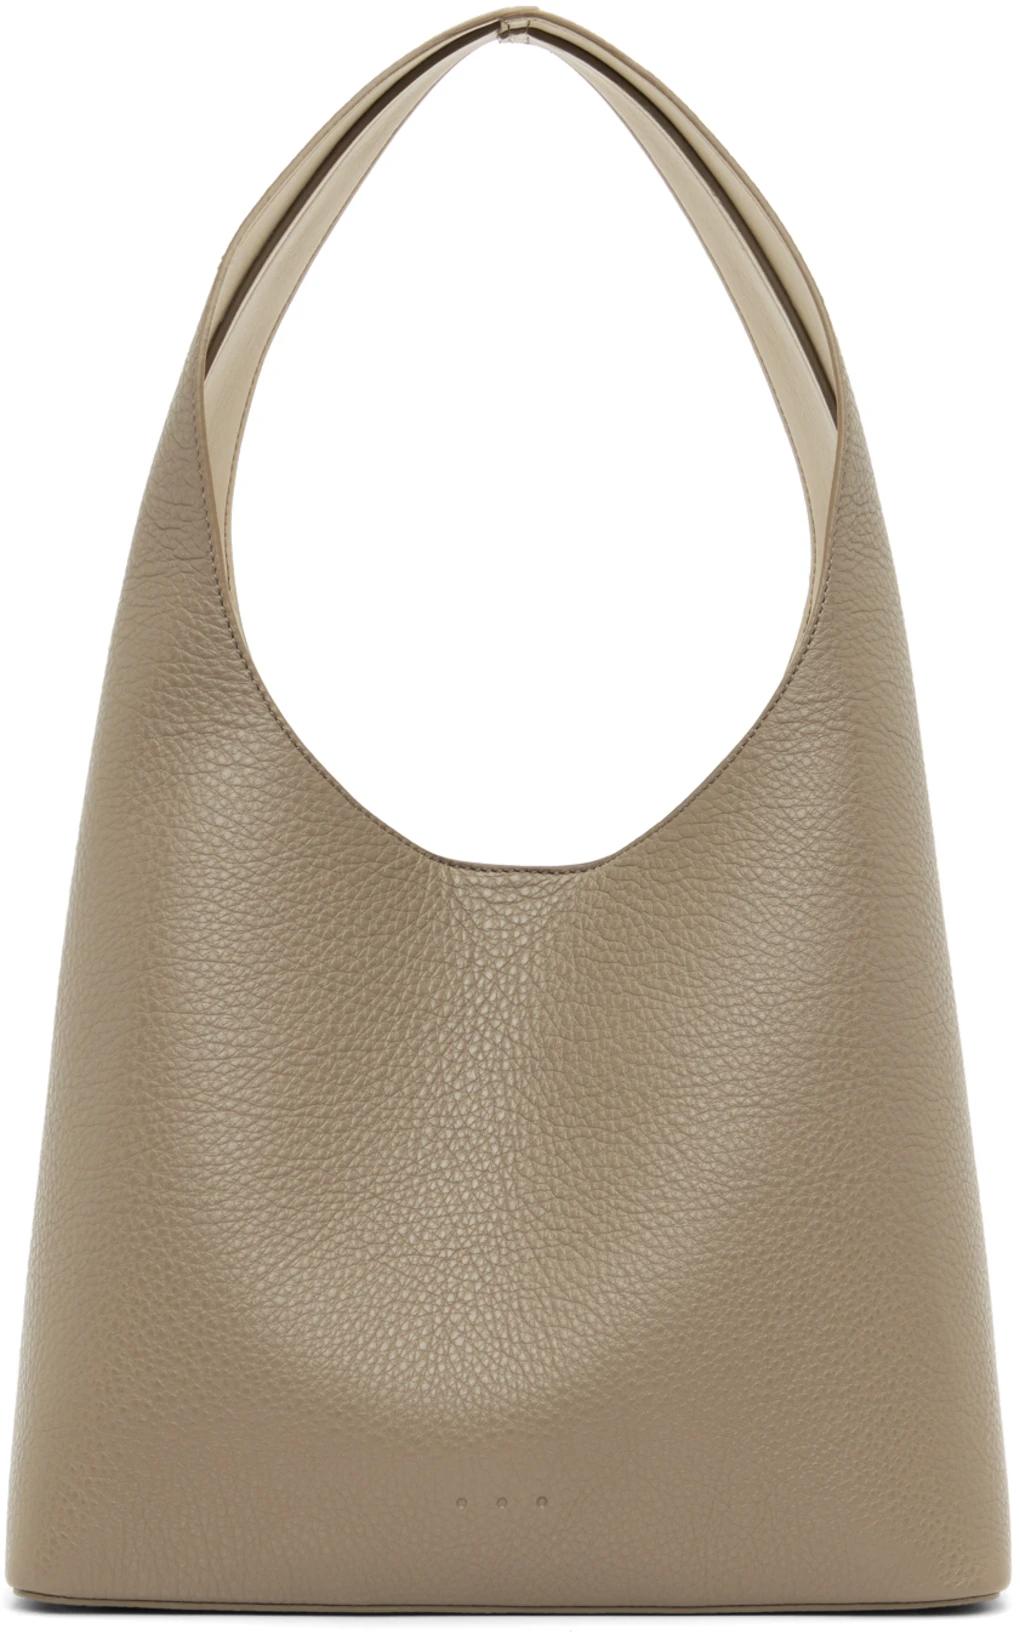 Taupe Midi Shoulder Bag by AESTHER EKME